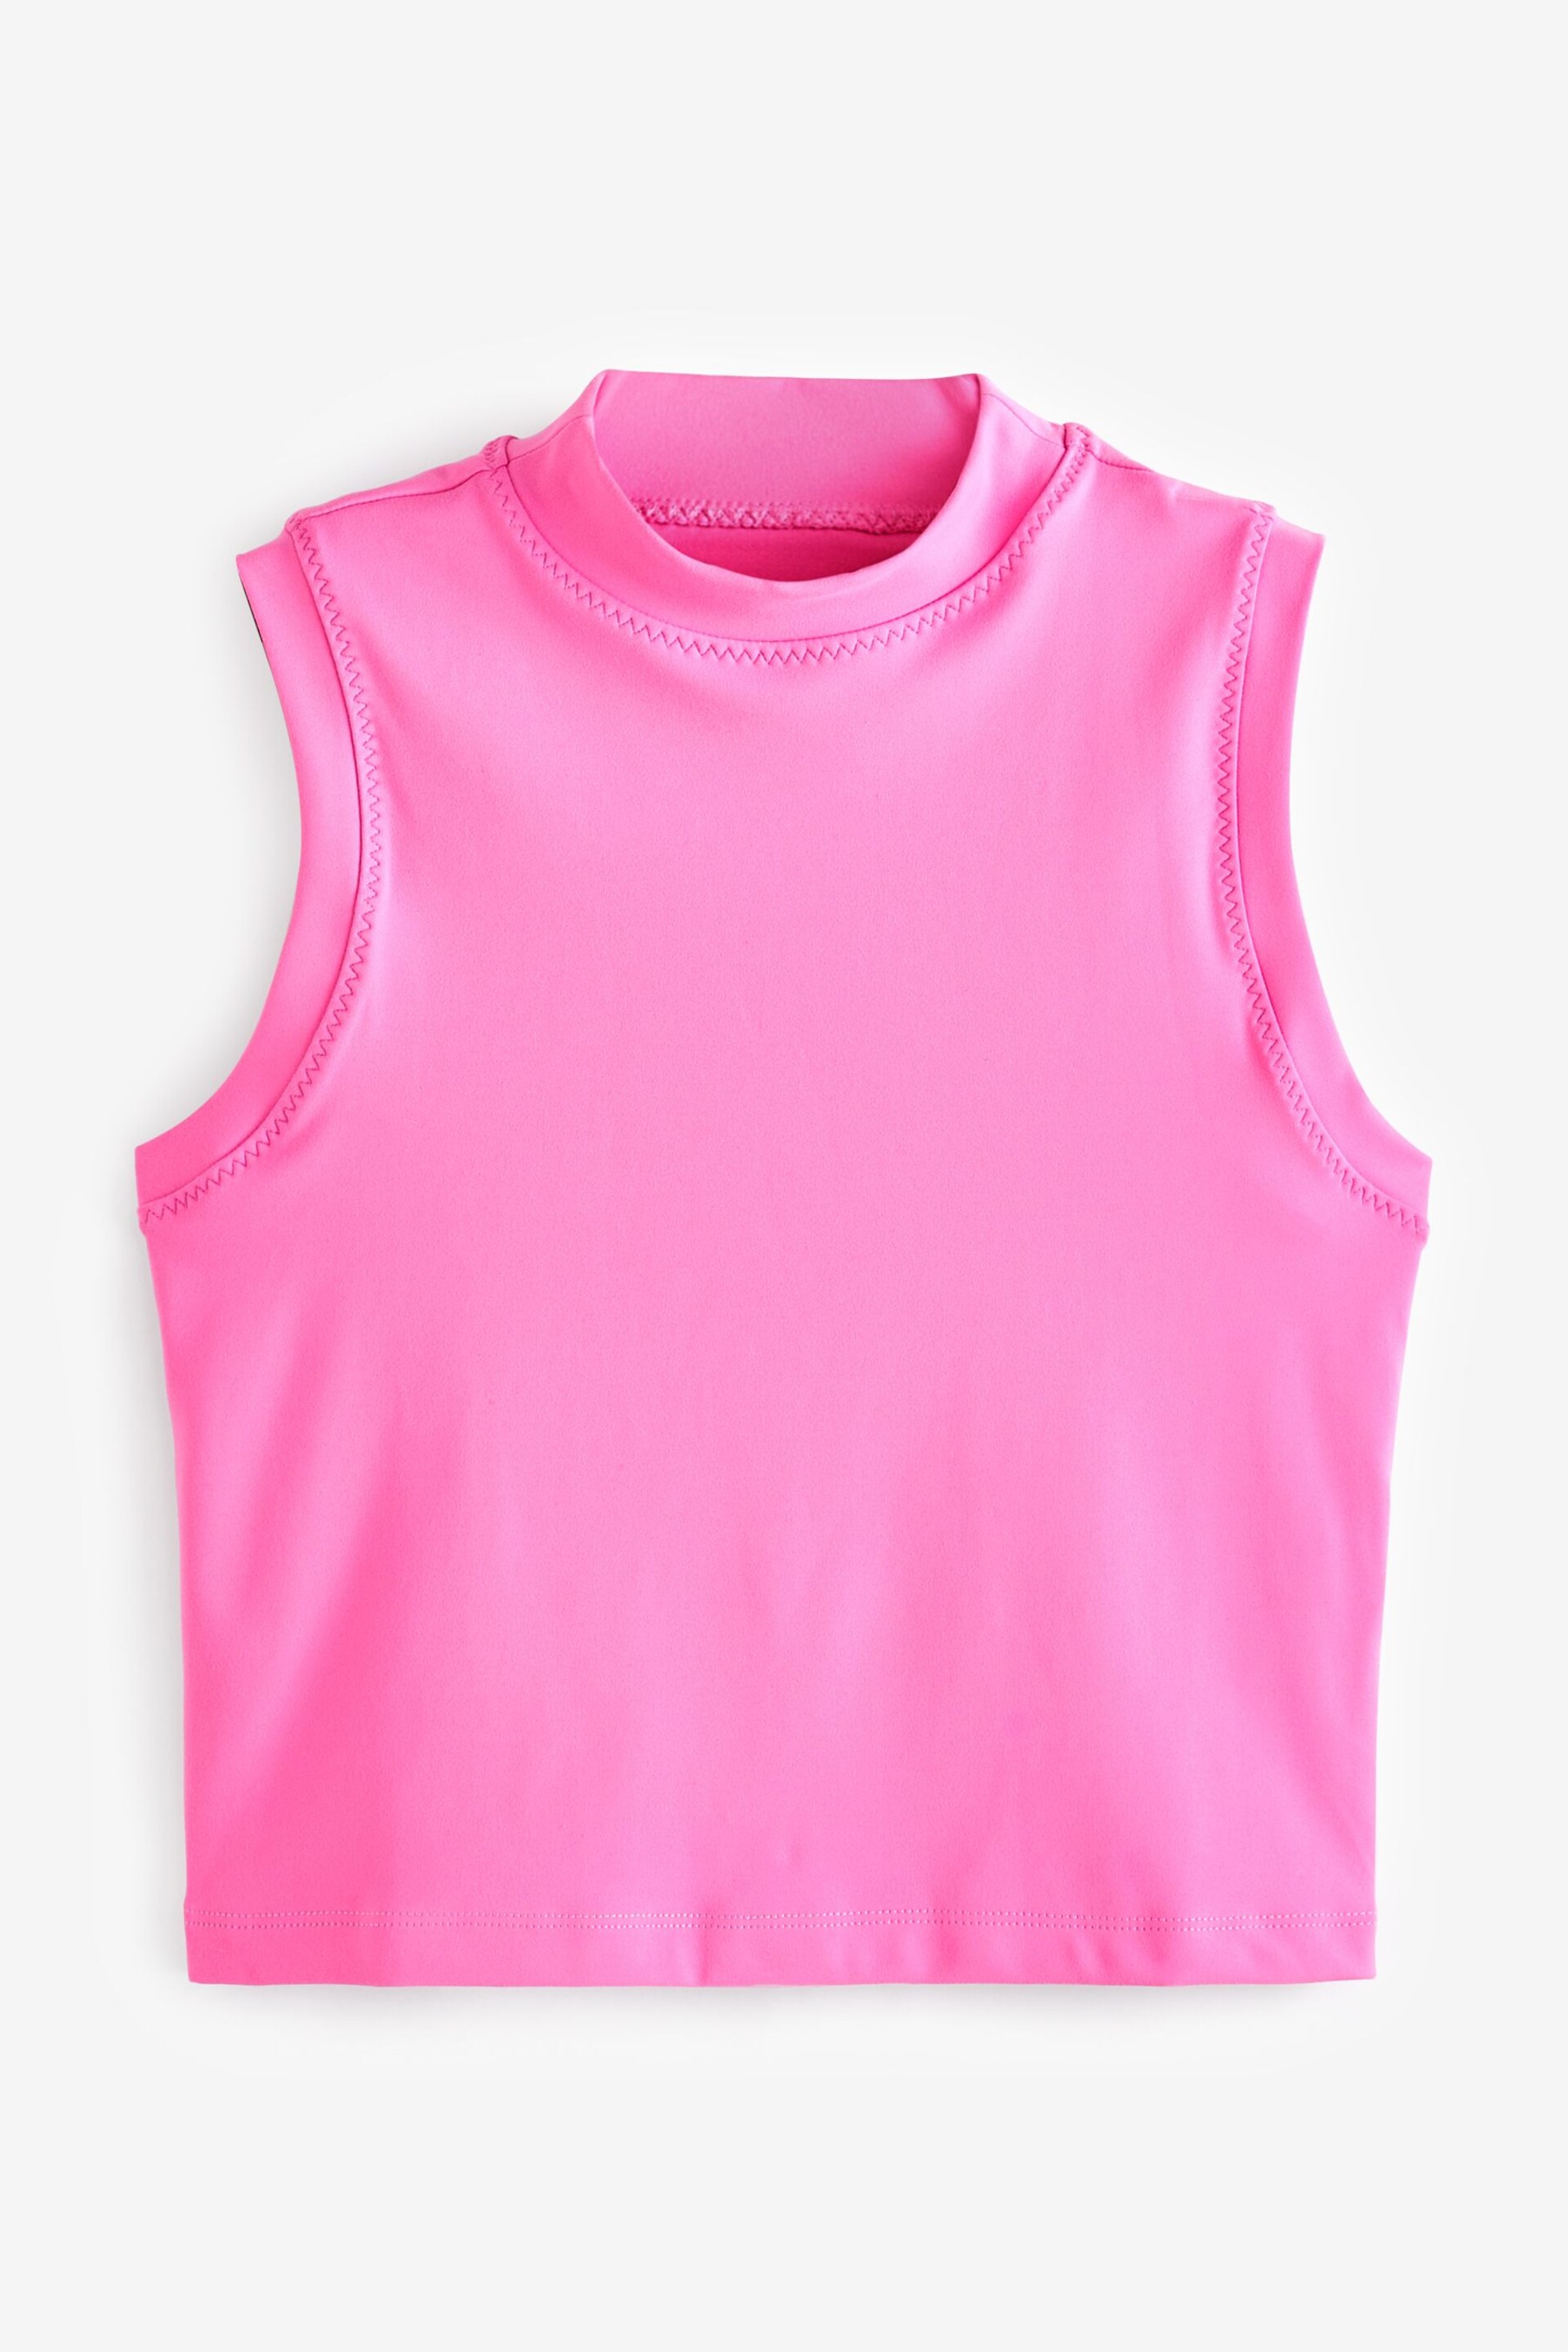 Nike Pink One Dri-FIT Mock Neck Cropped Tank Top - Image 7 of 9